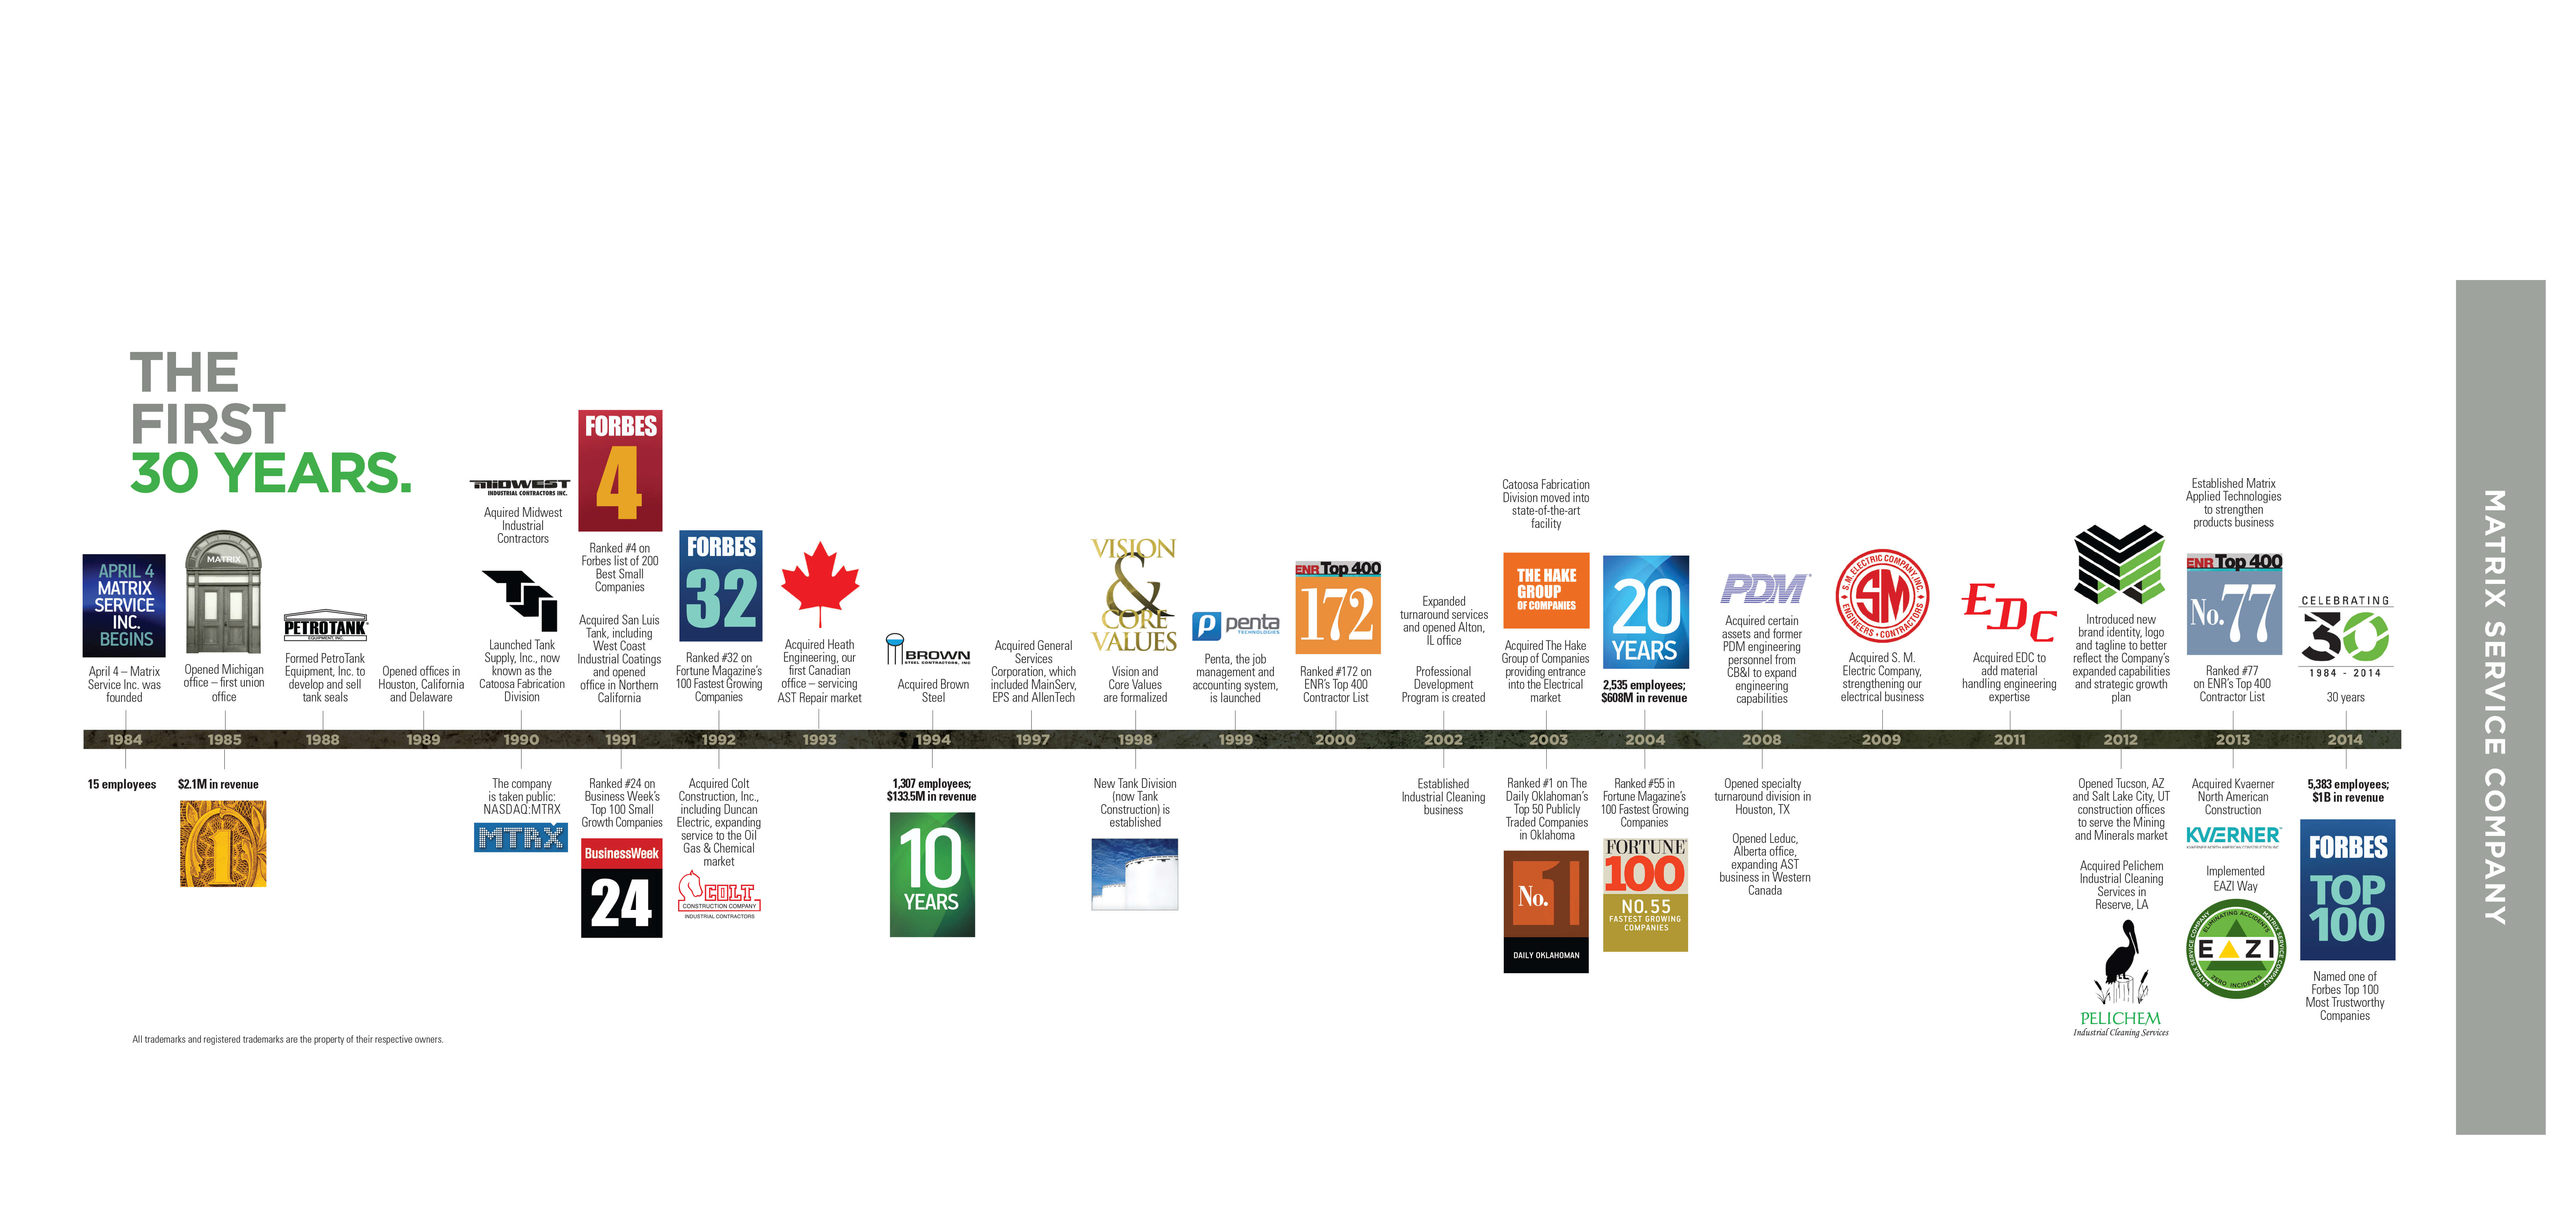 Time line of the first 30 years